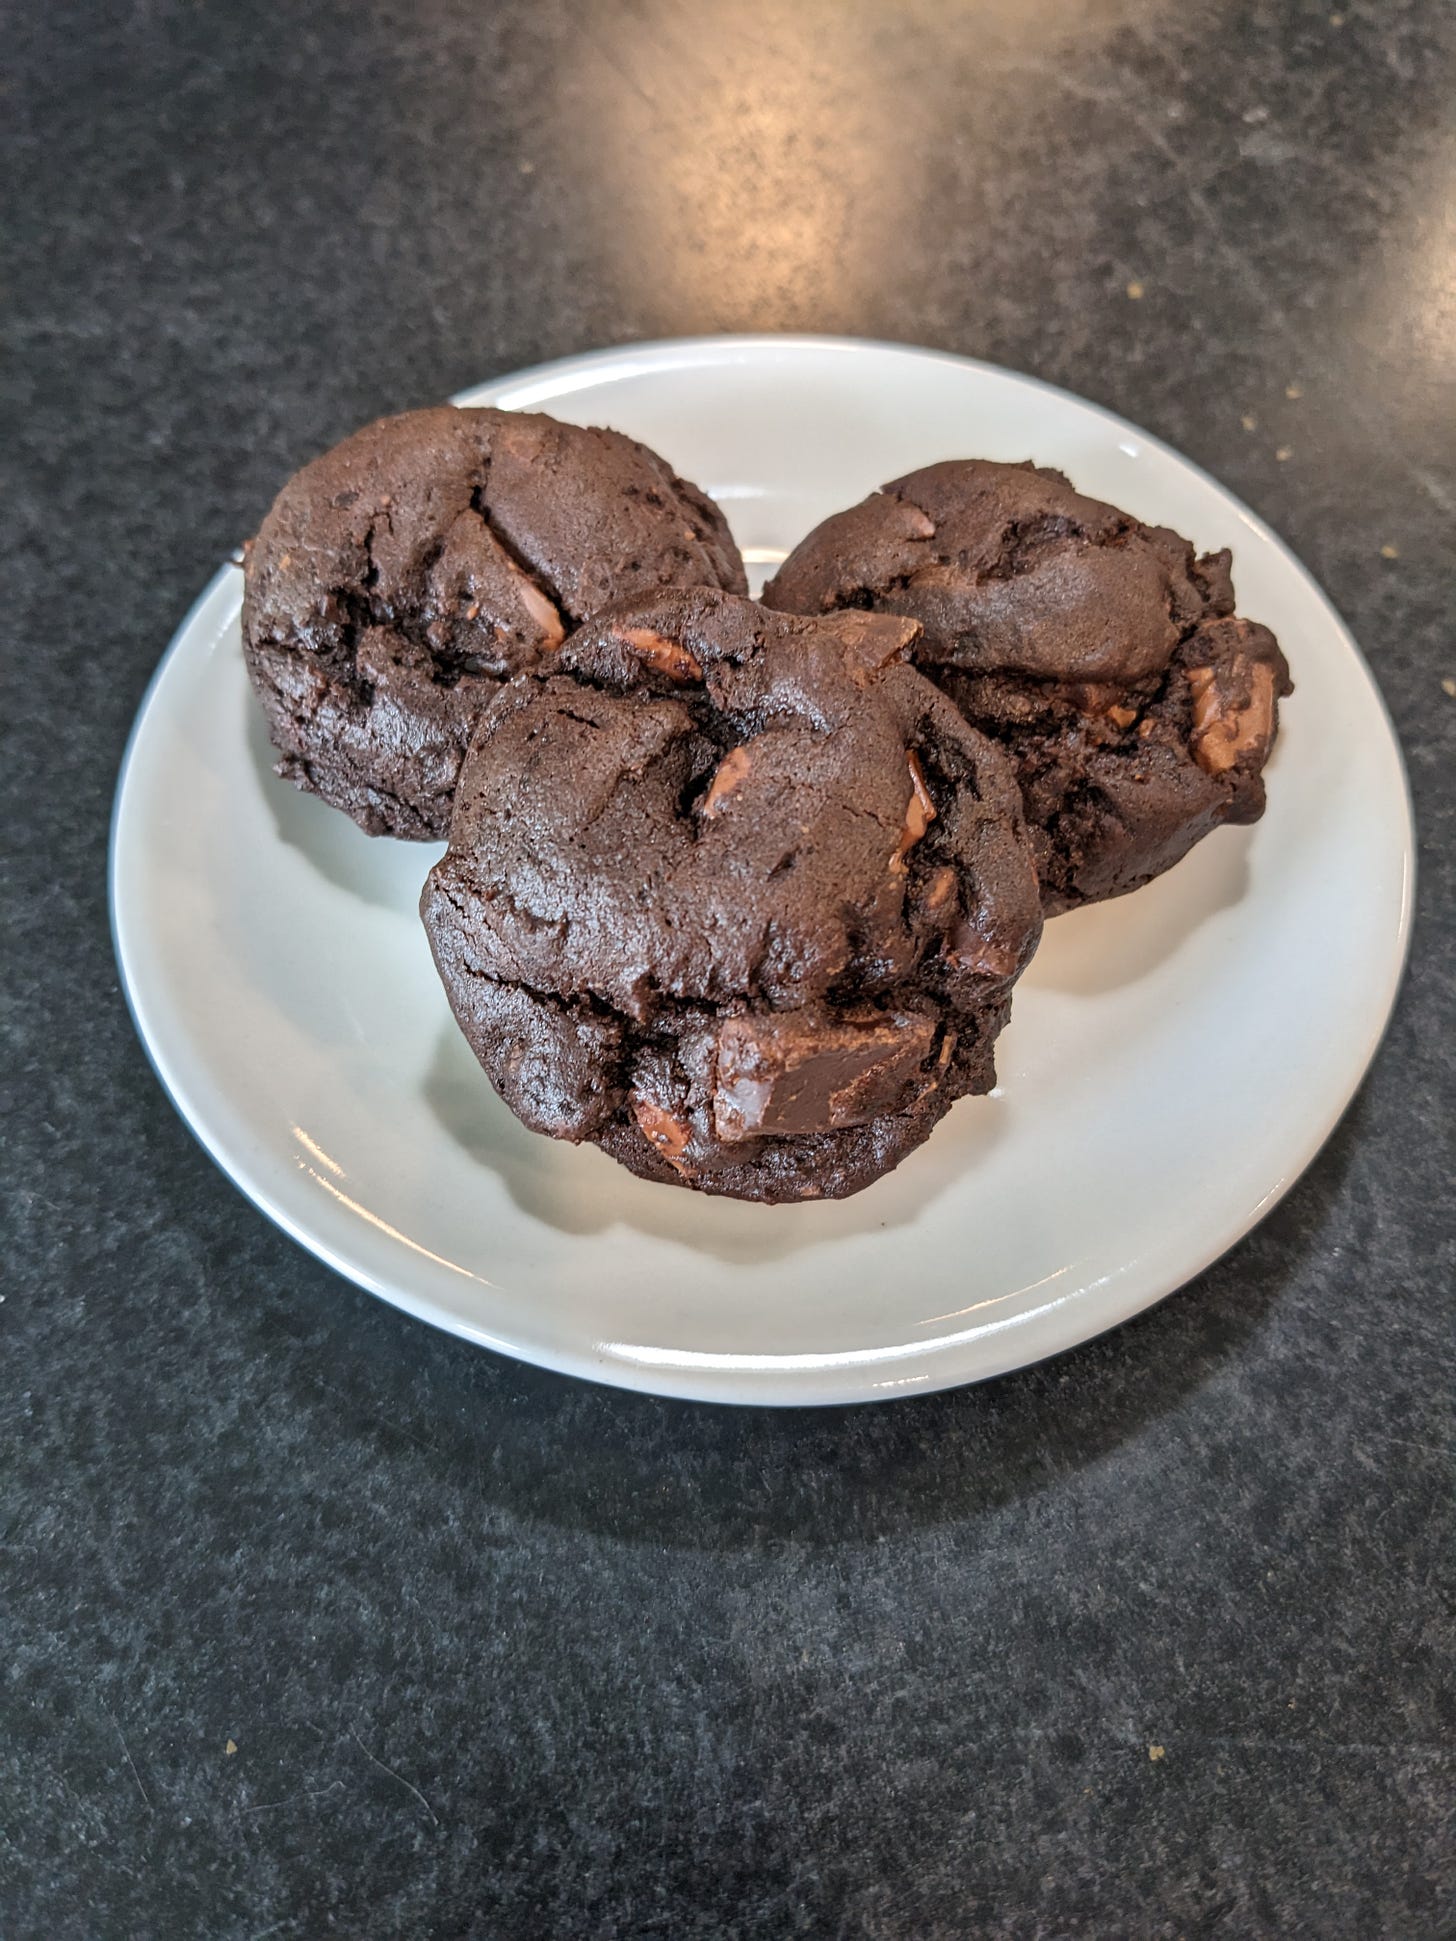 A small white plate holding three chocolate cookies